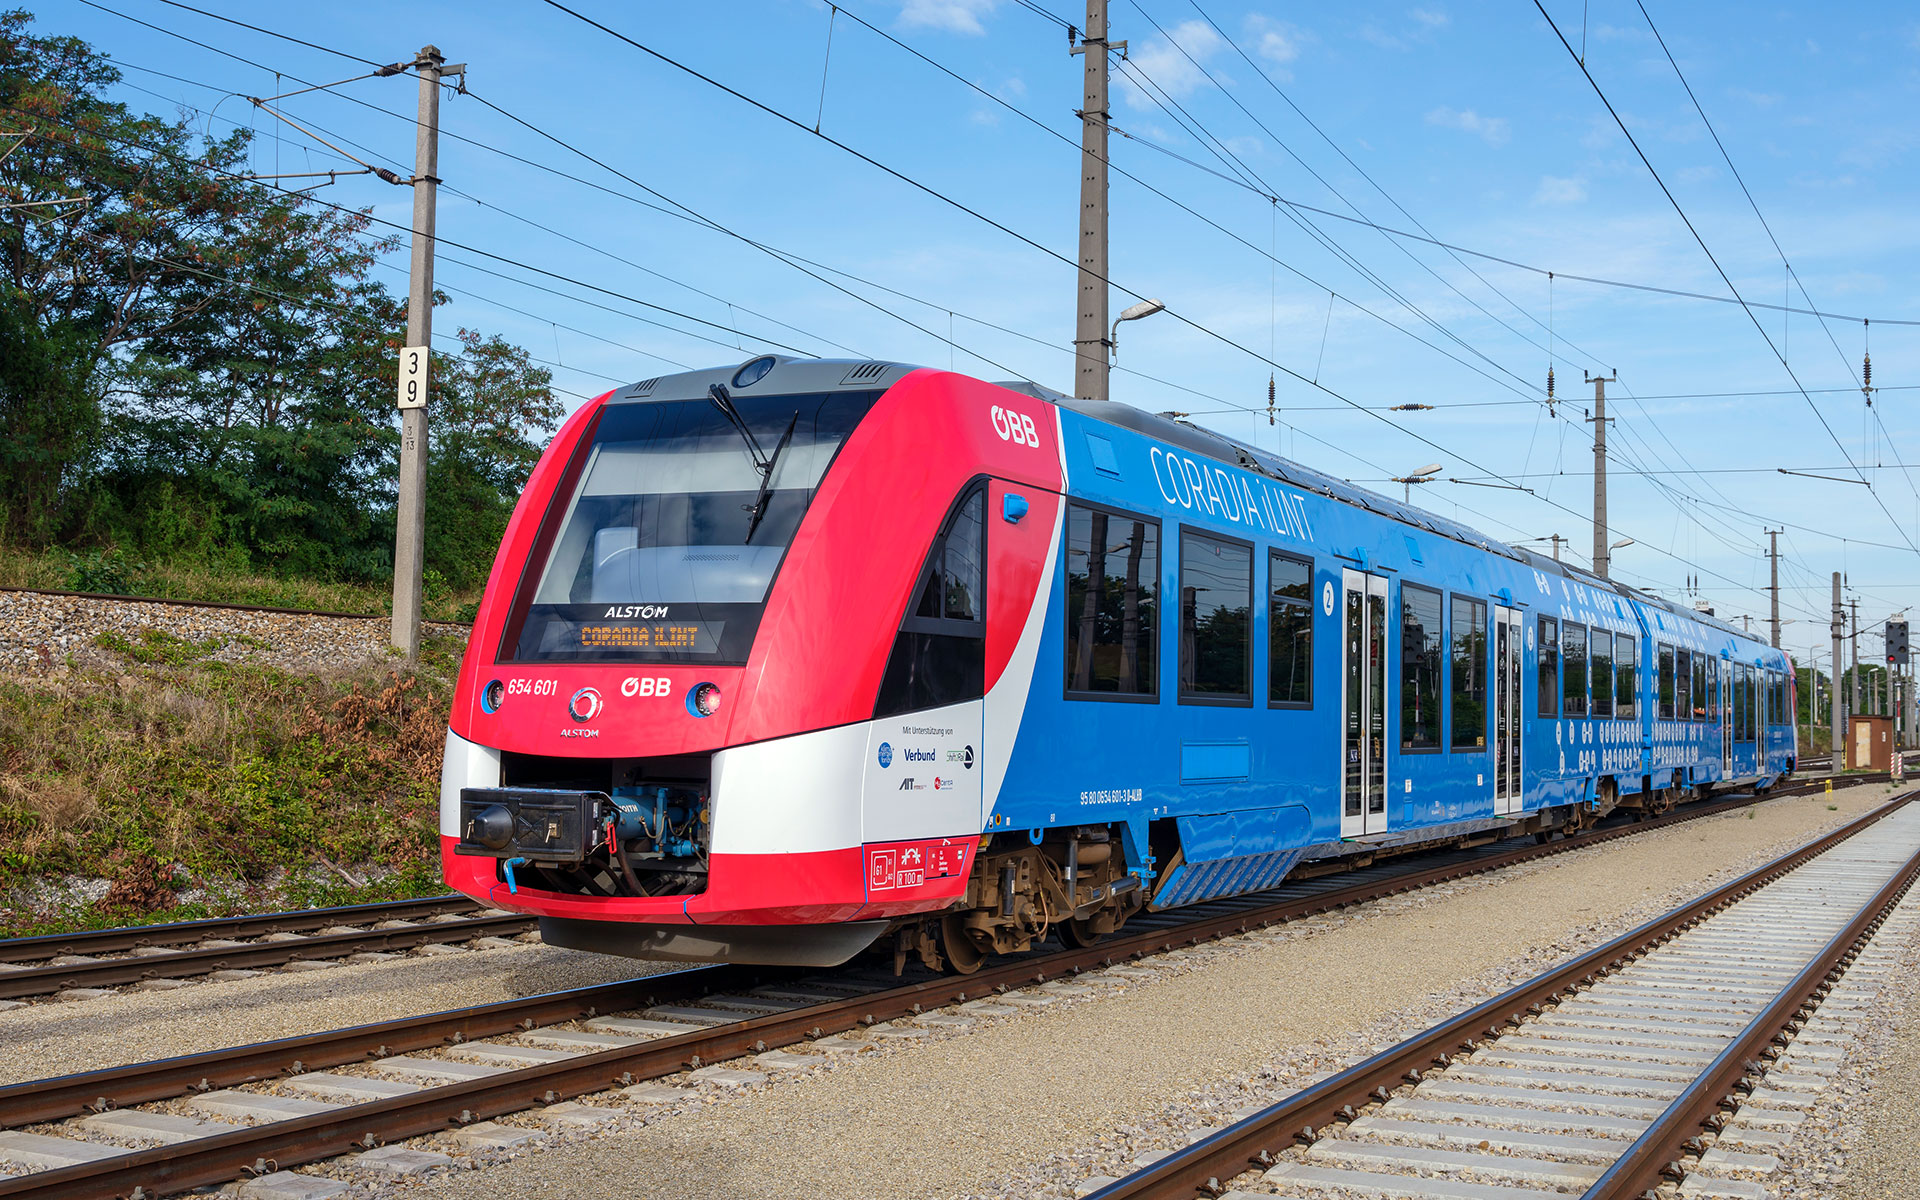 A Coradia iLint train on a commercial test run in Austria on 21 September 2020 (photo © ALSTOM / Christoph Busse).